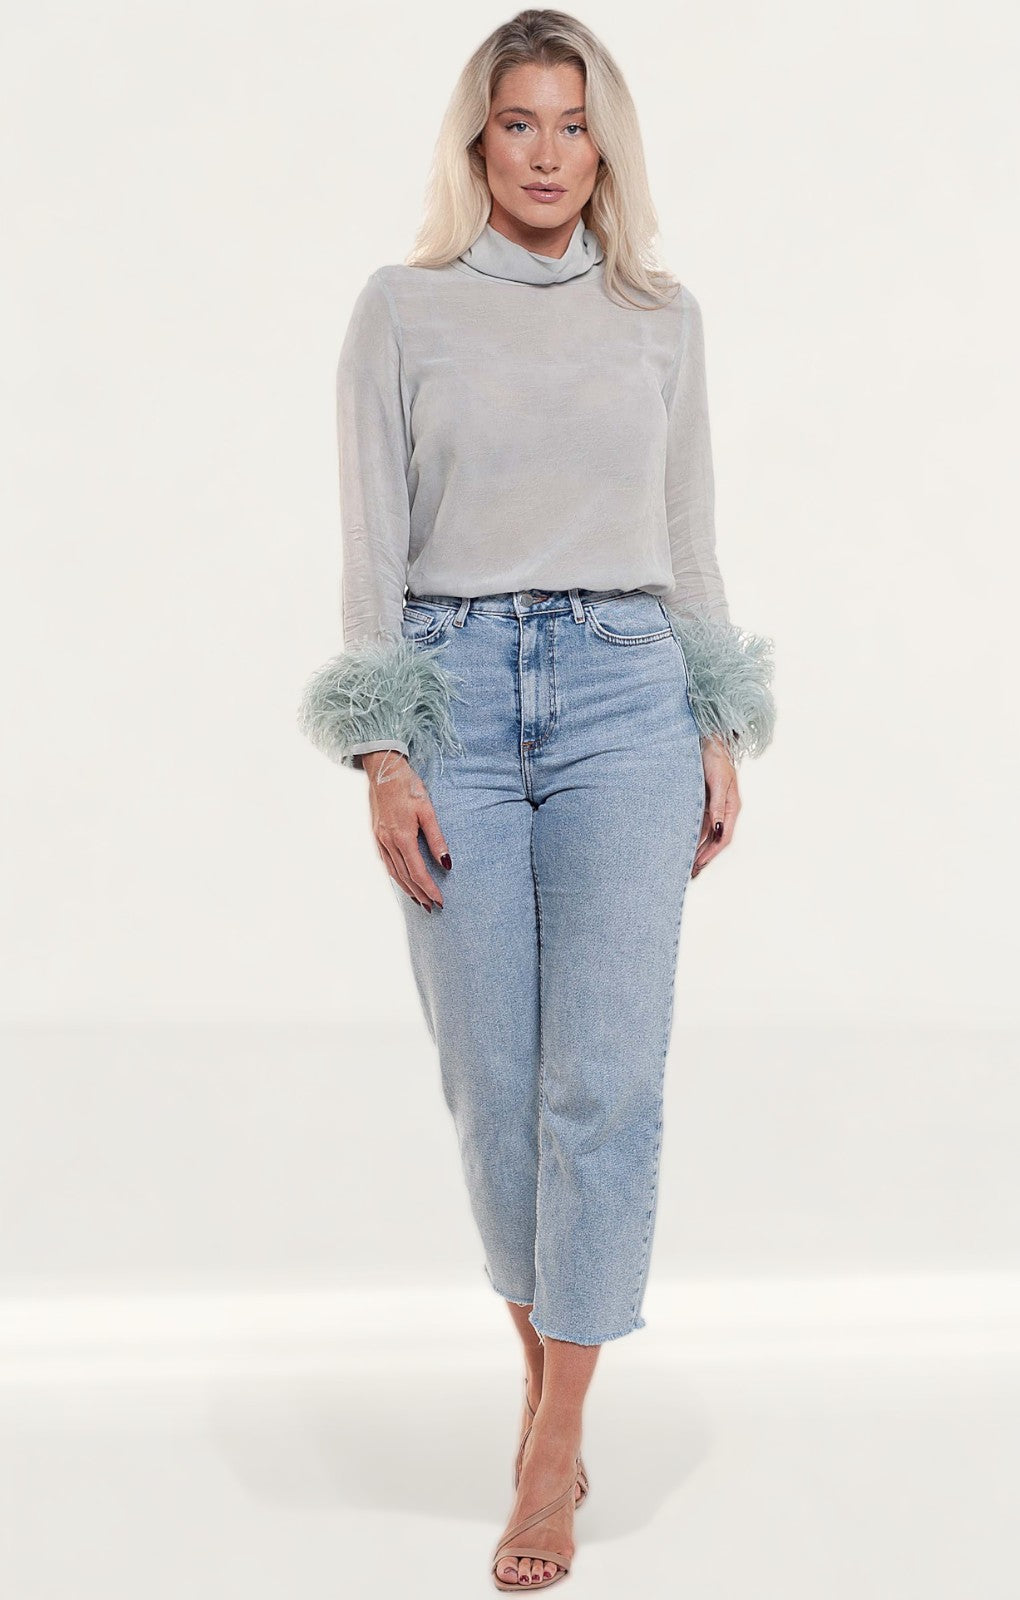 Rent Zara Pearl Grey Blouse With Jacquard Feathers